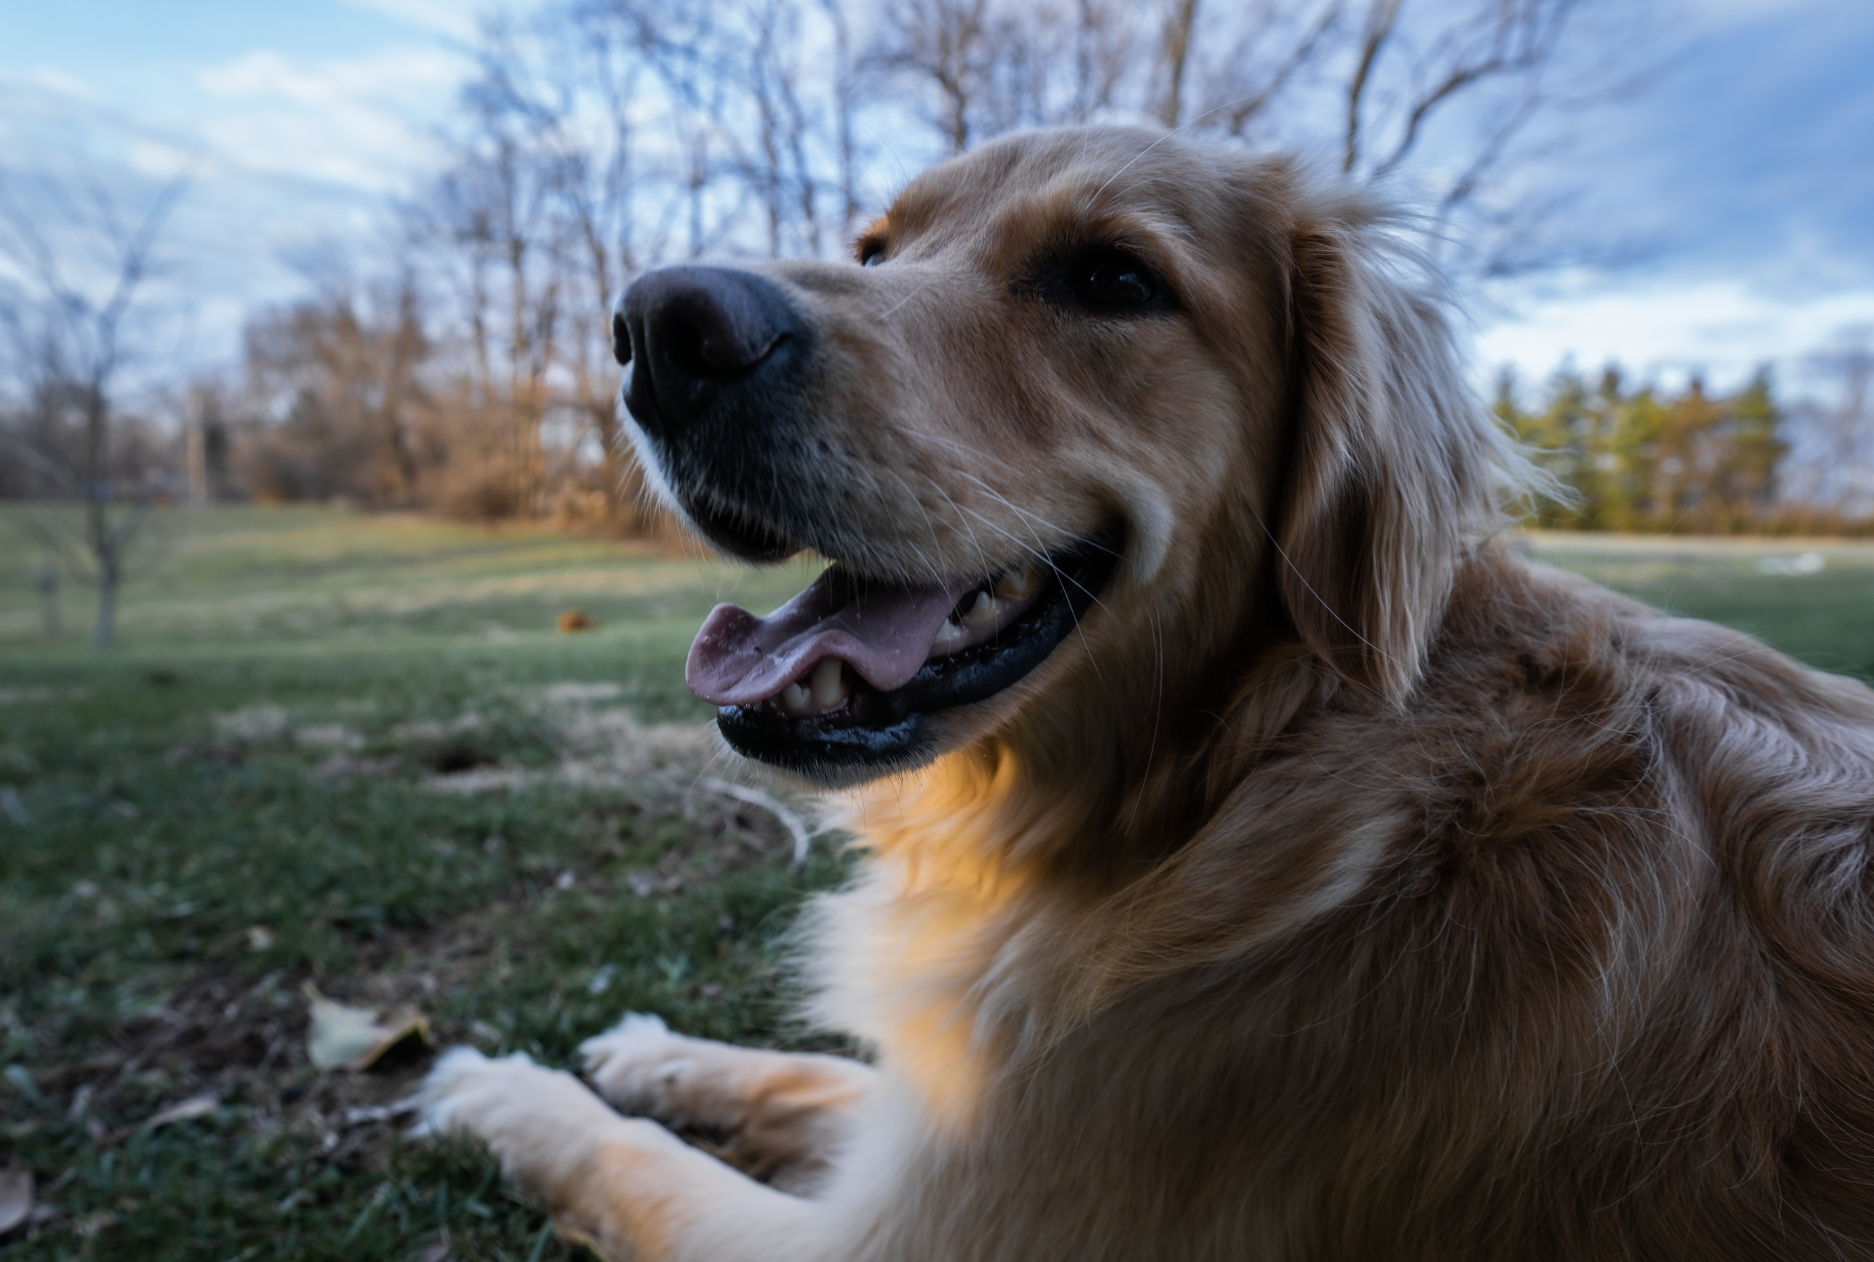 Golden retriever dog smiling with green grass and blue skies behind her